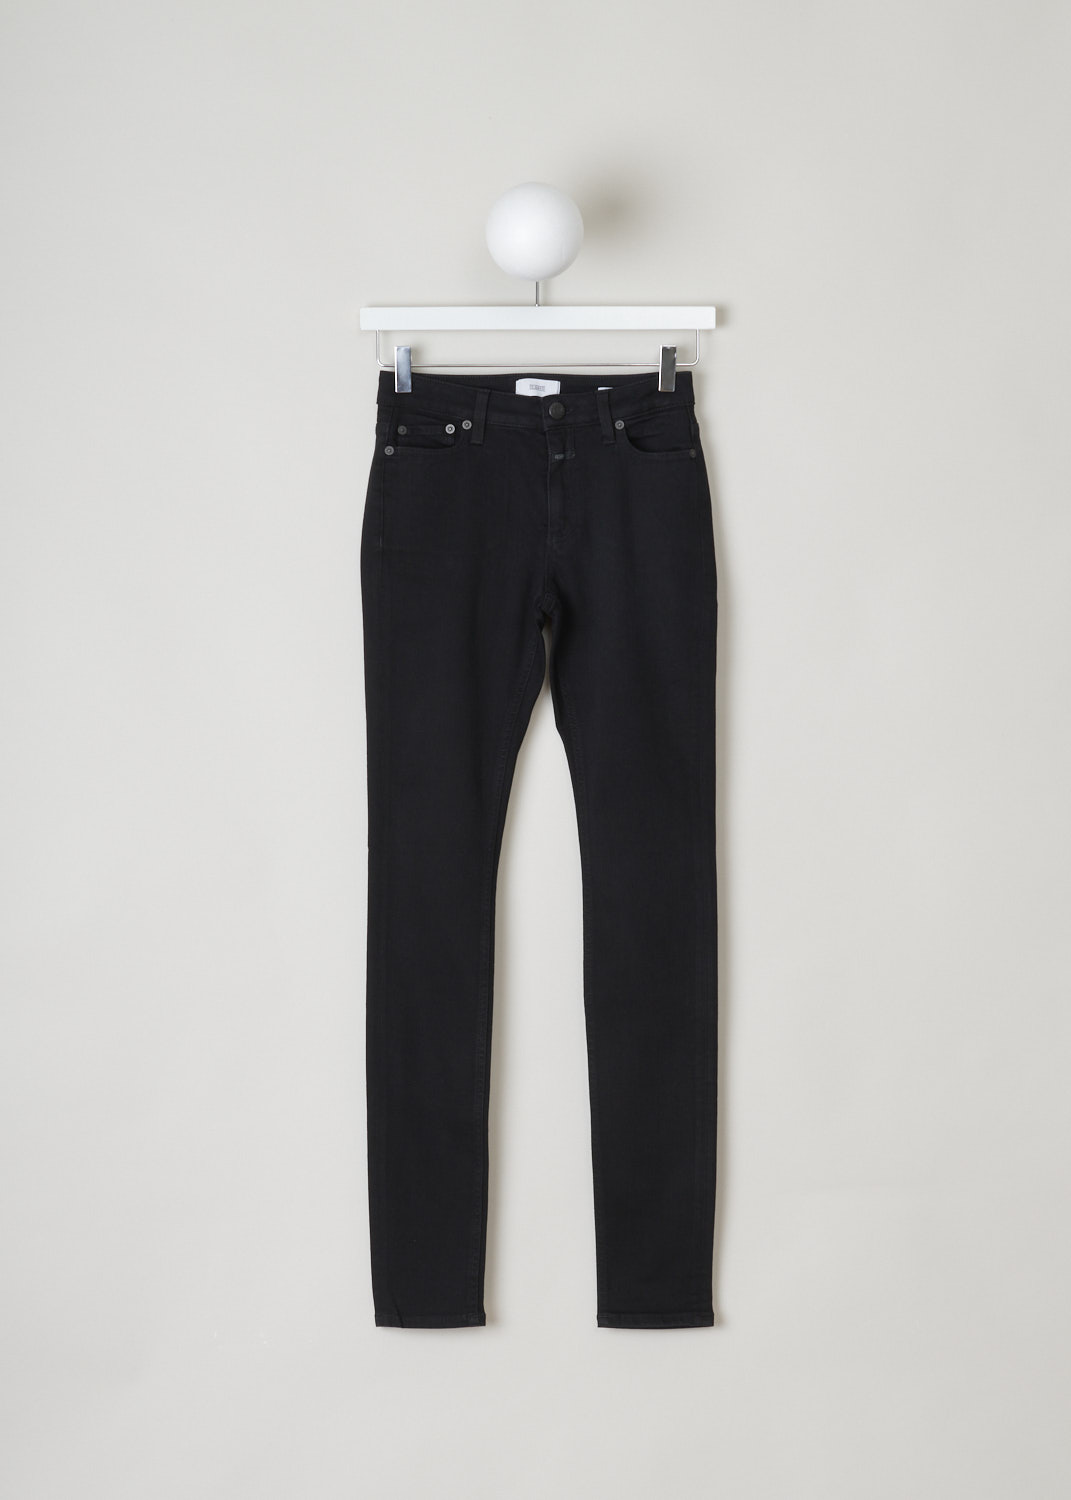 Closed, Black skinny lizzy jeans, lizzy_C91099_0E3_ED_ED, black, front, All black 5-pocket jeans comes in a skinny fit, and mid-waist height. The cotton blend used for this model is know for its high elasticity.